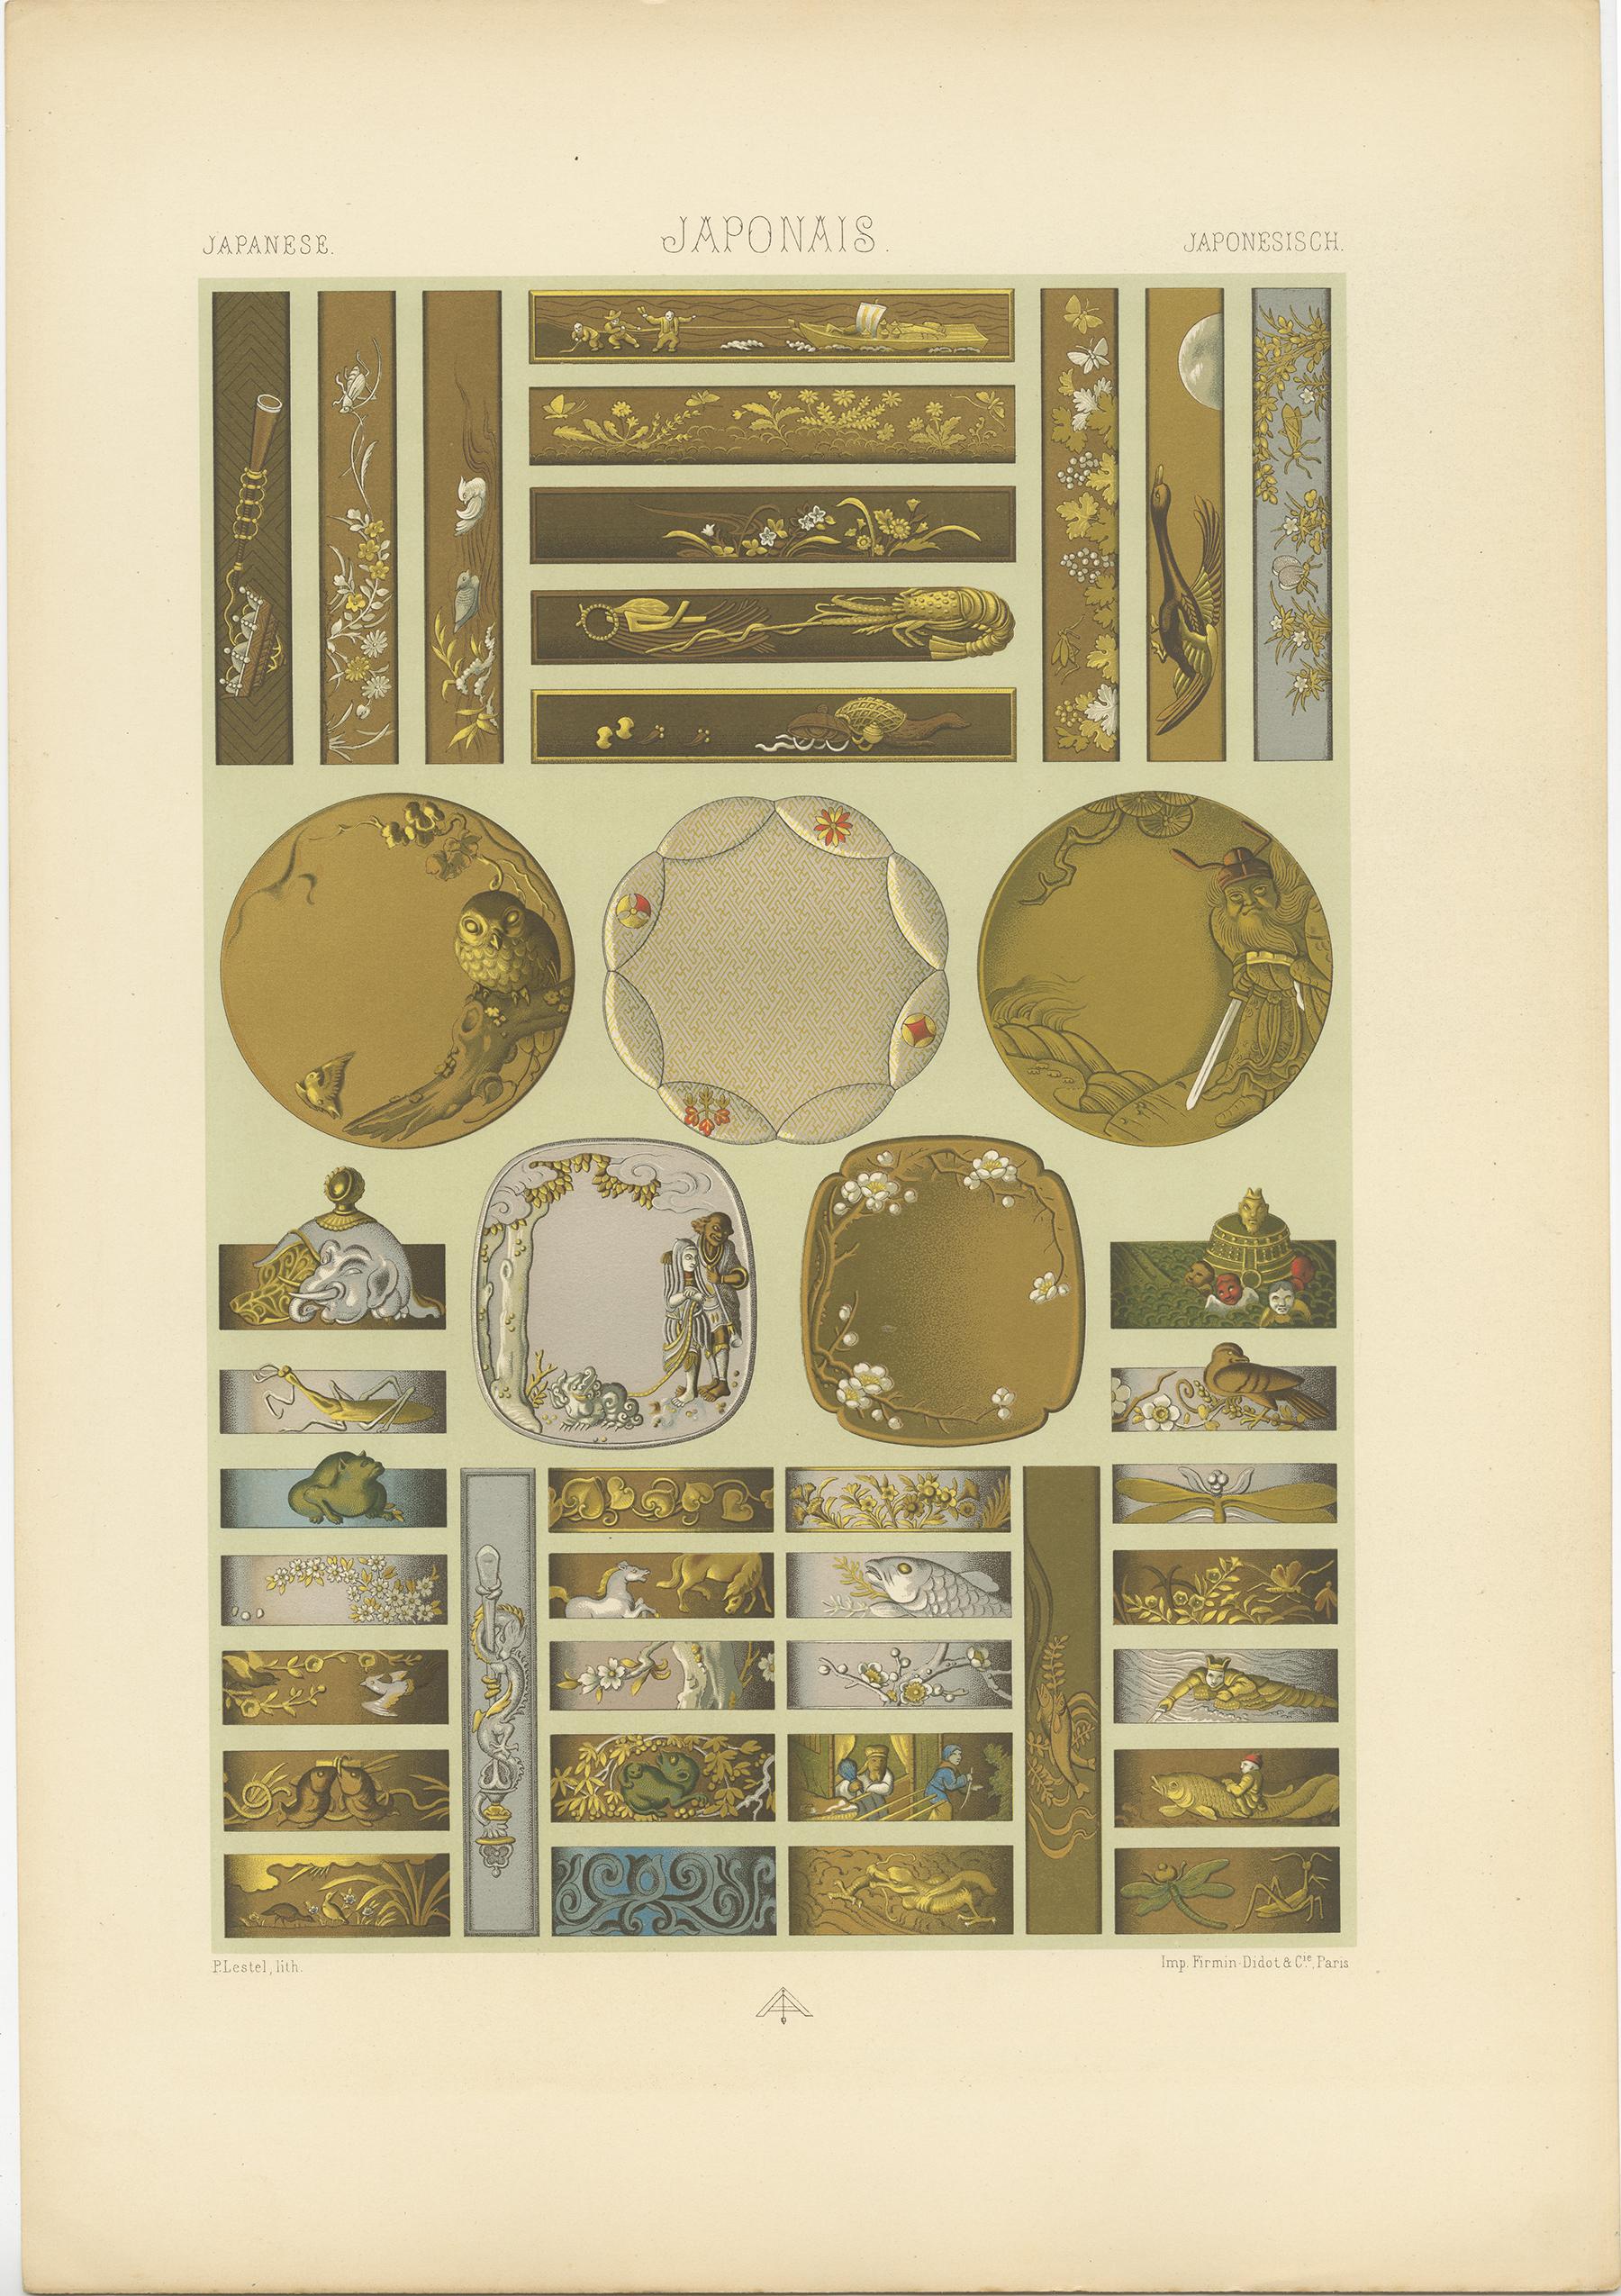 Antique print titled 'Japanese - Japonais - Japonesisch'. Chromolithograph of Japanese sword and knife guards and handles metal ornaments. This print originates from 'l'Ornement Polychrome' by Auguste Racinet. Published, circa 1890.